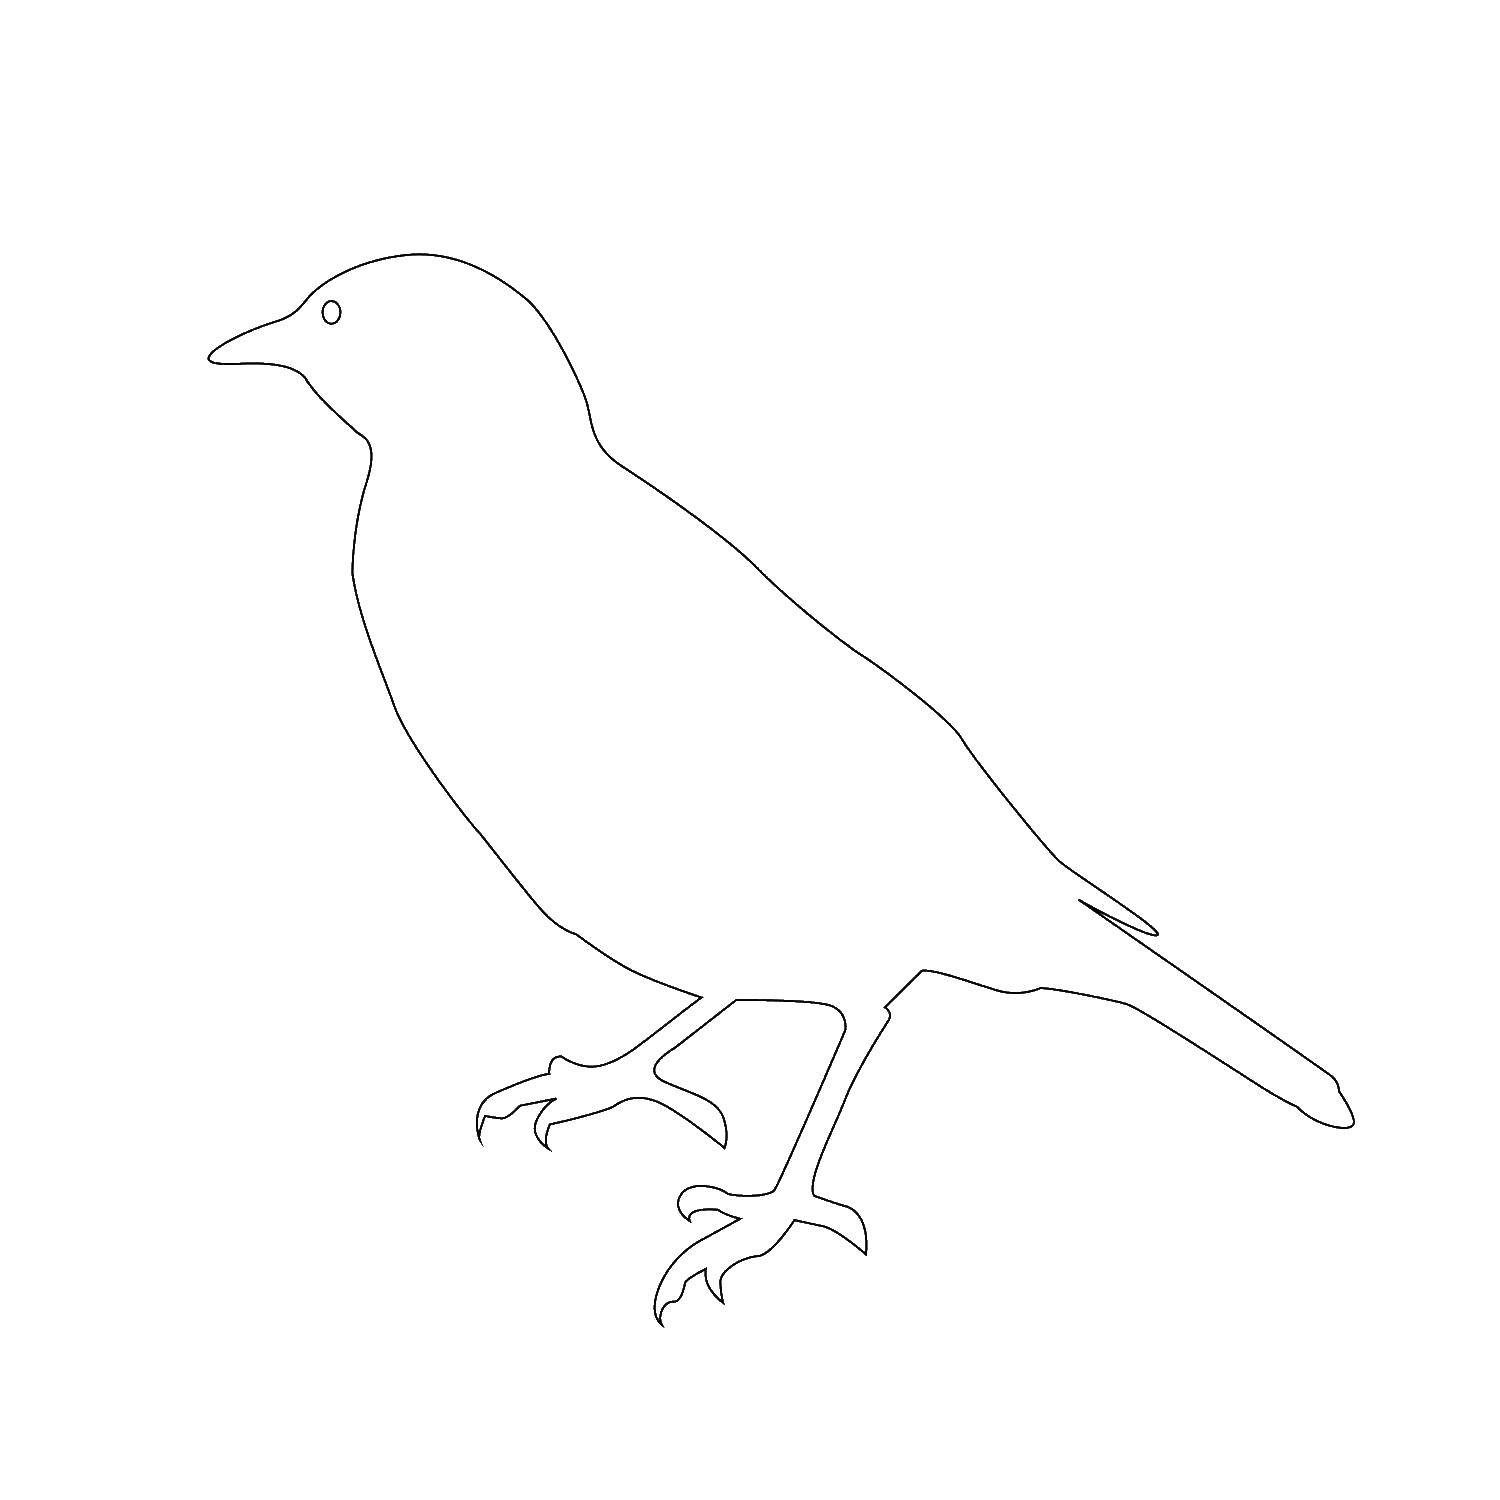 Coloring Outline birds. Category The contours of birds. Tags:  contour, outline, poultry.